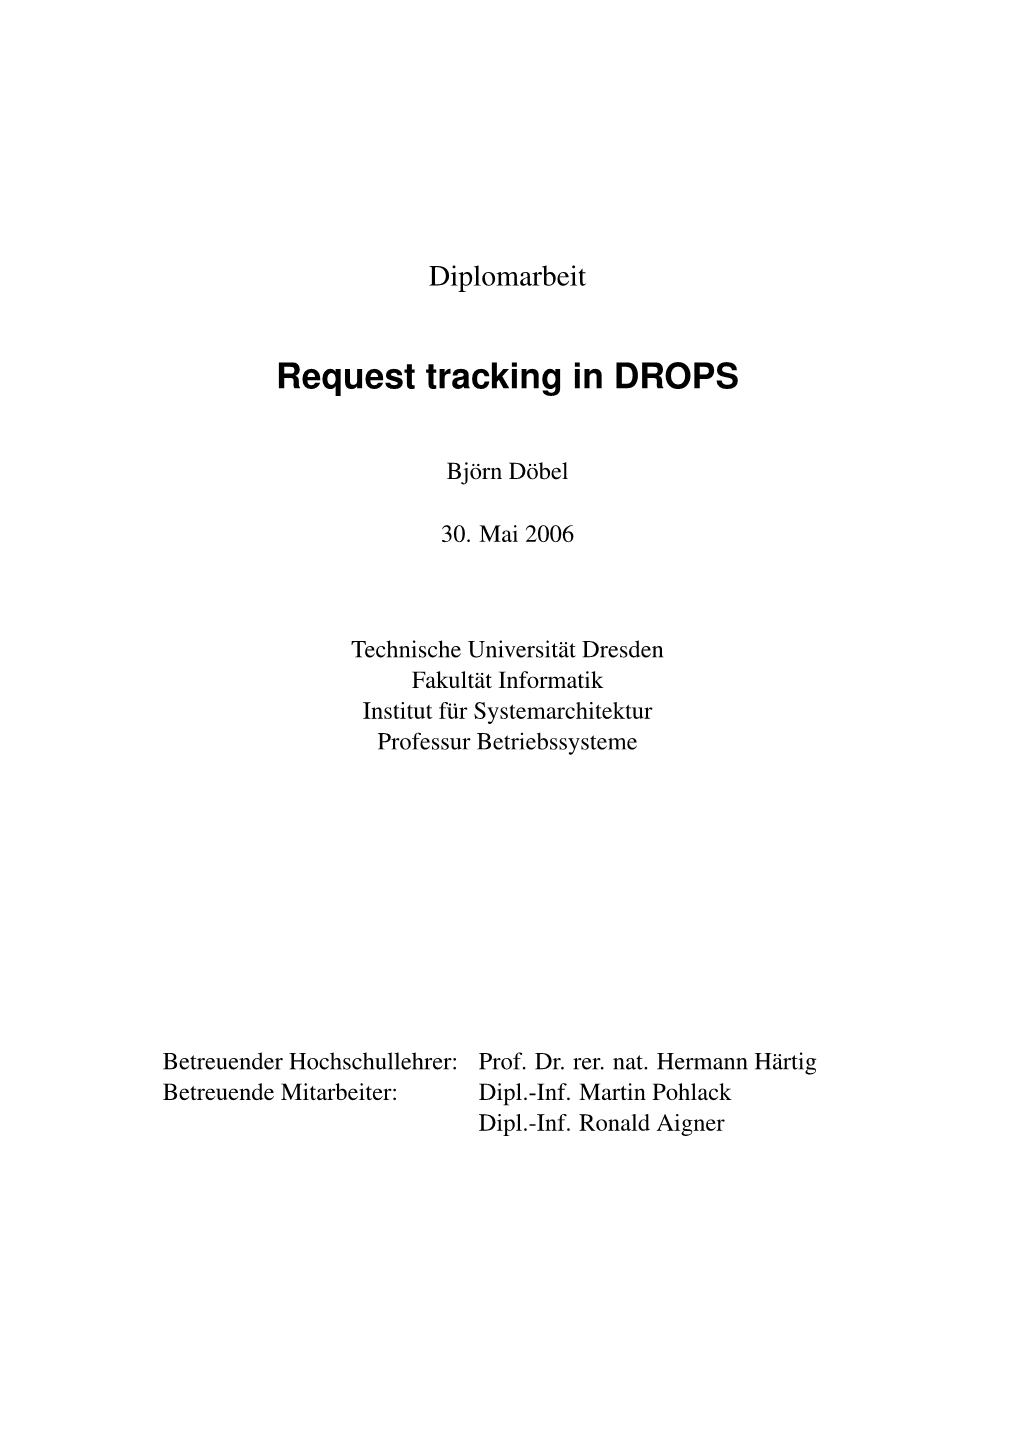 Request Tracking in DROPS